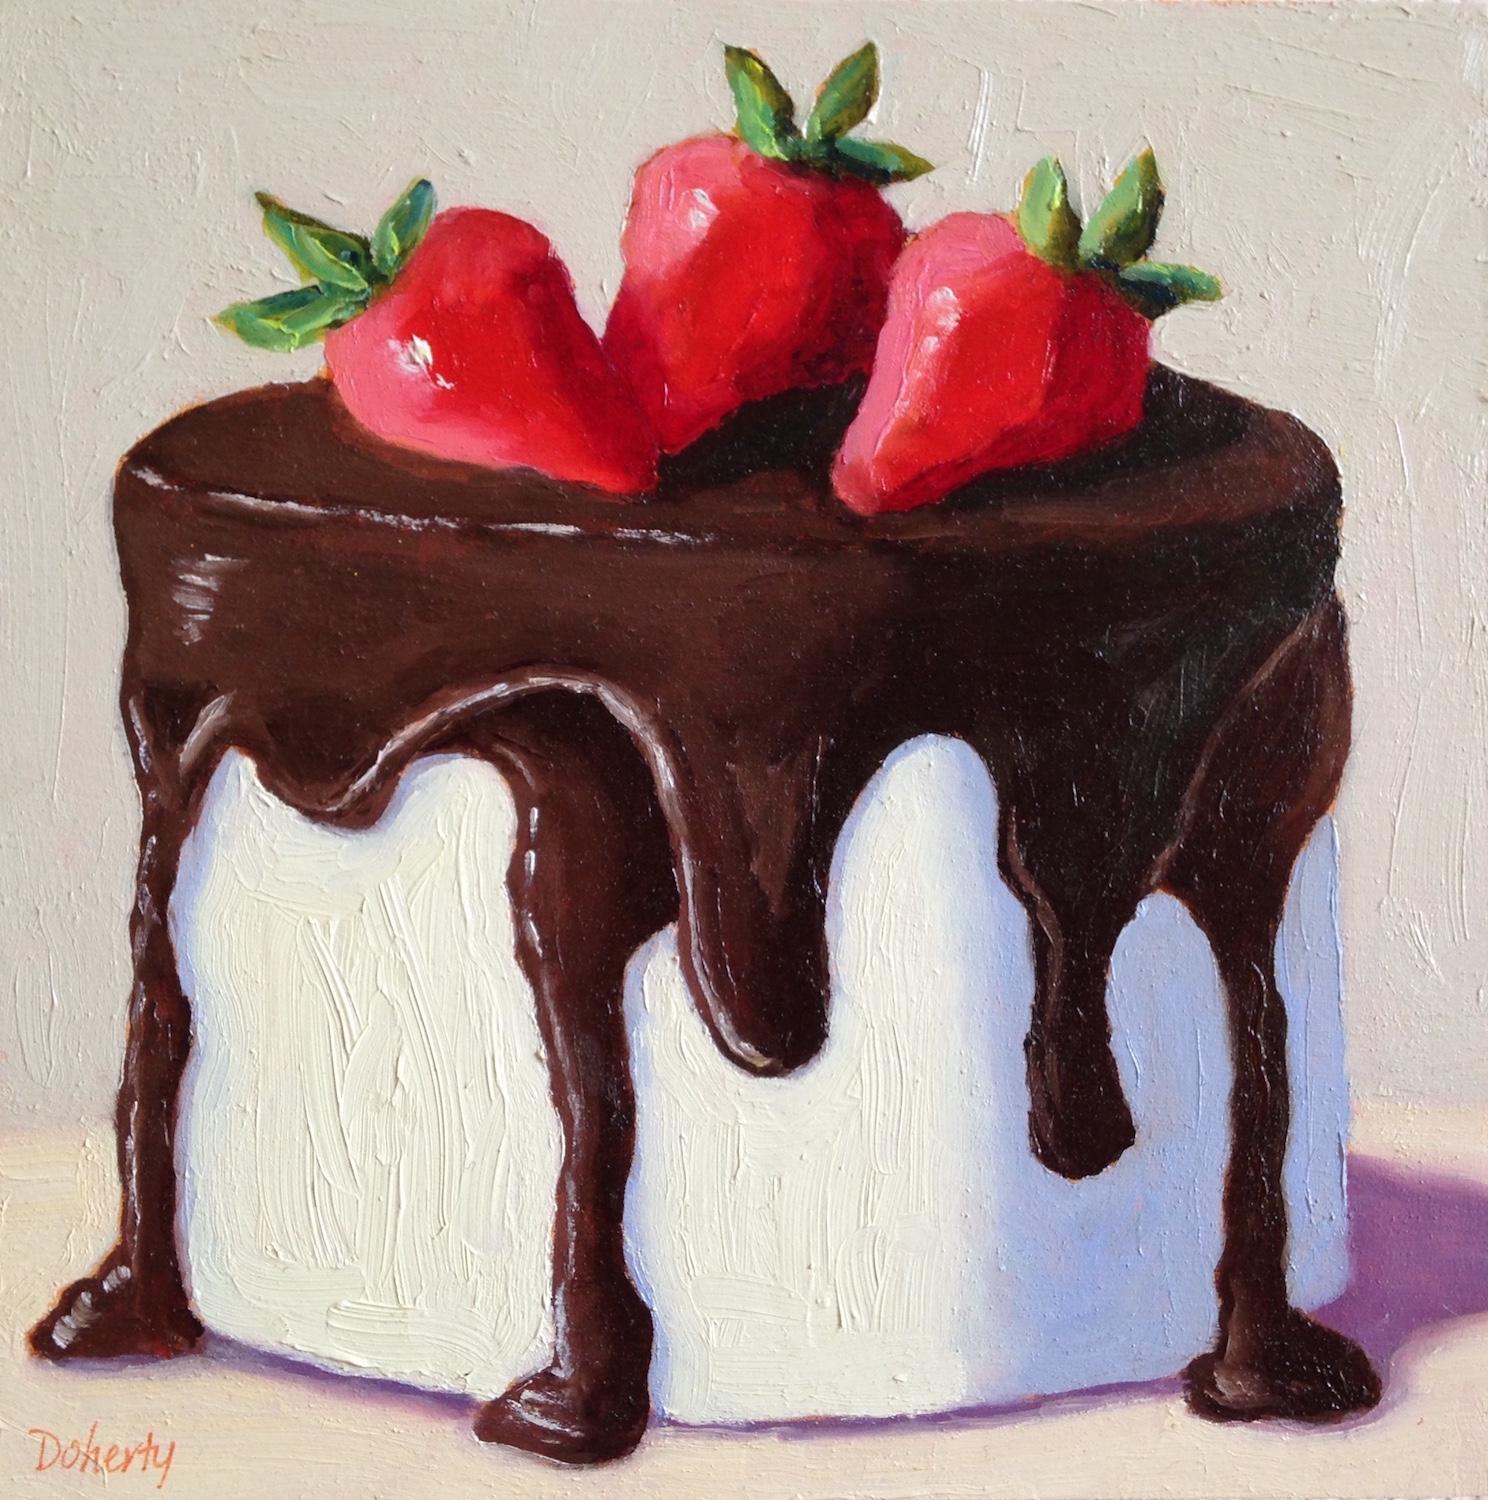 Pat Doherty Still-Life Painting - Tuxedo Cake with Strawberries, Oil Painting